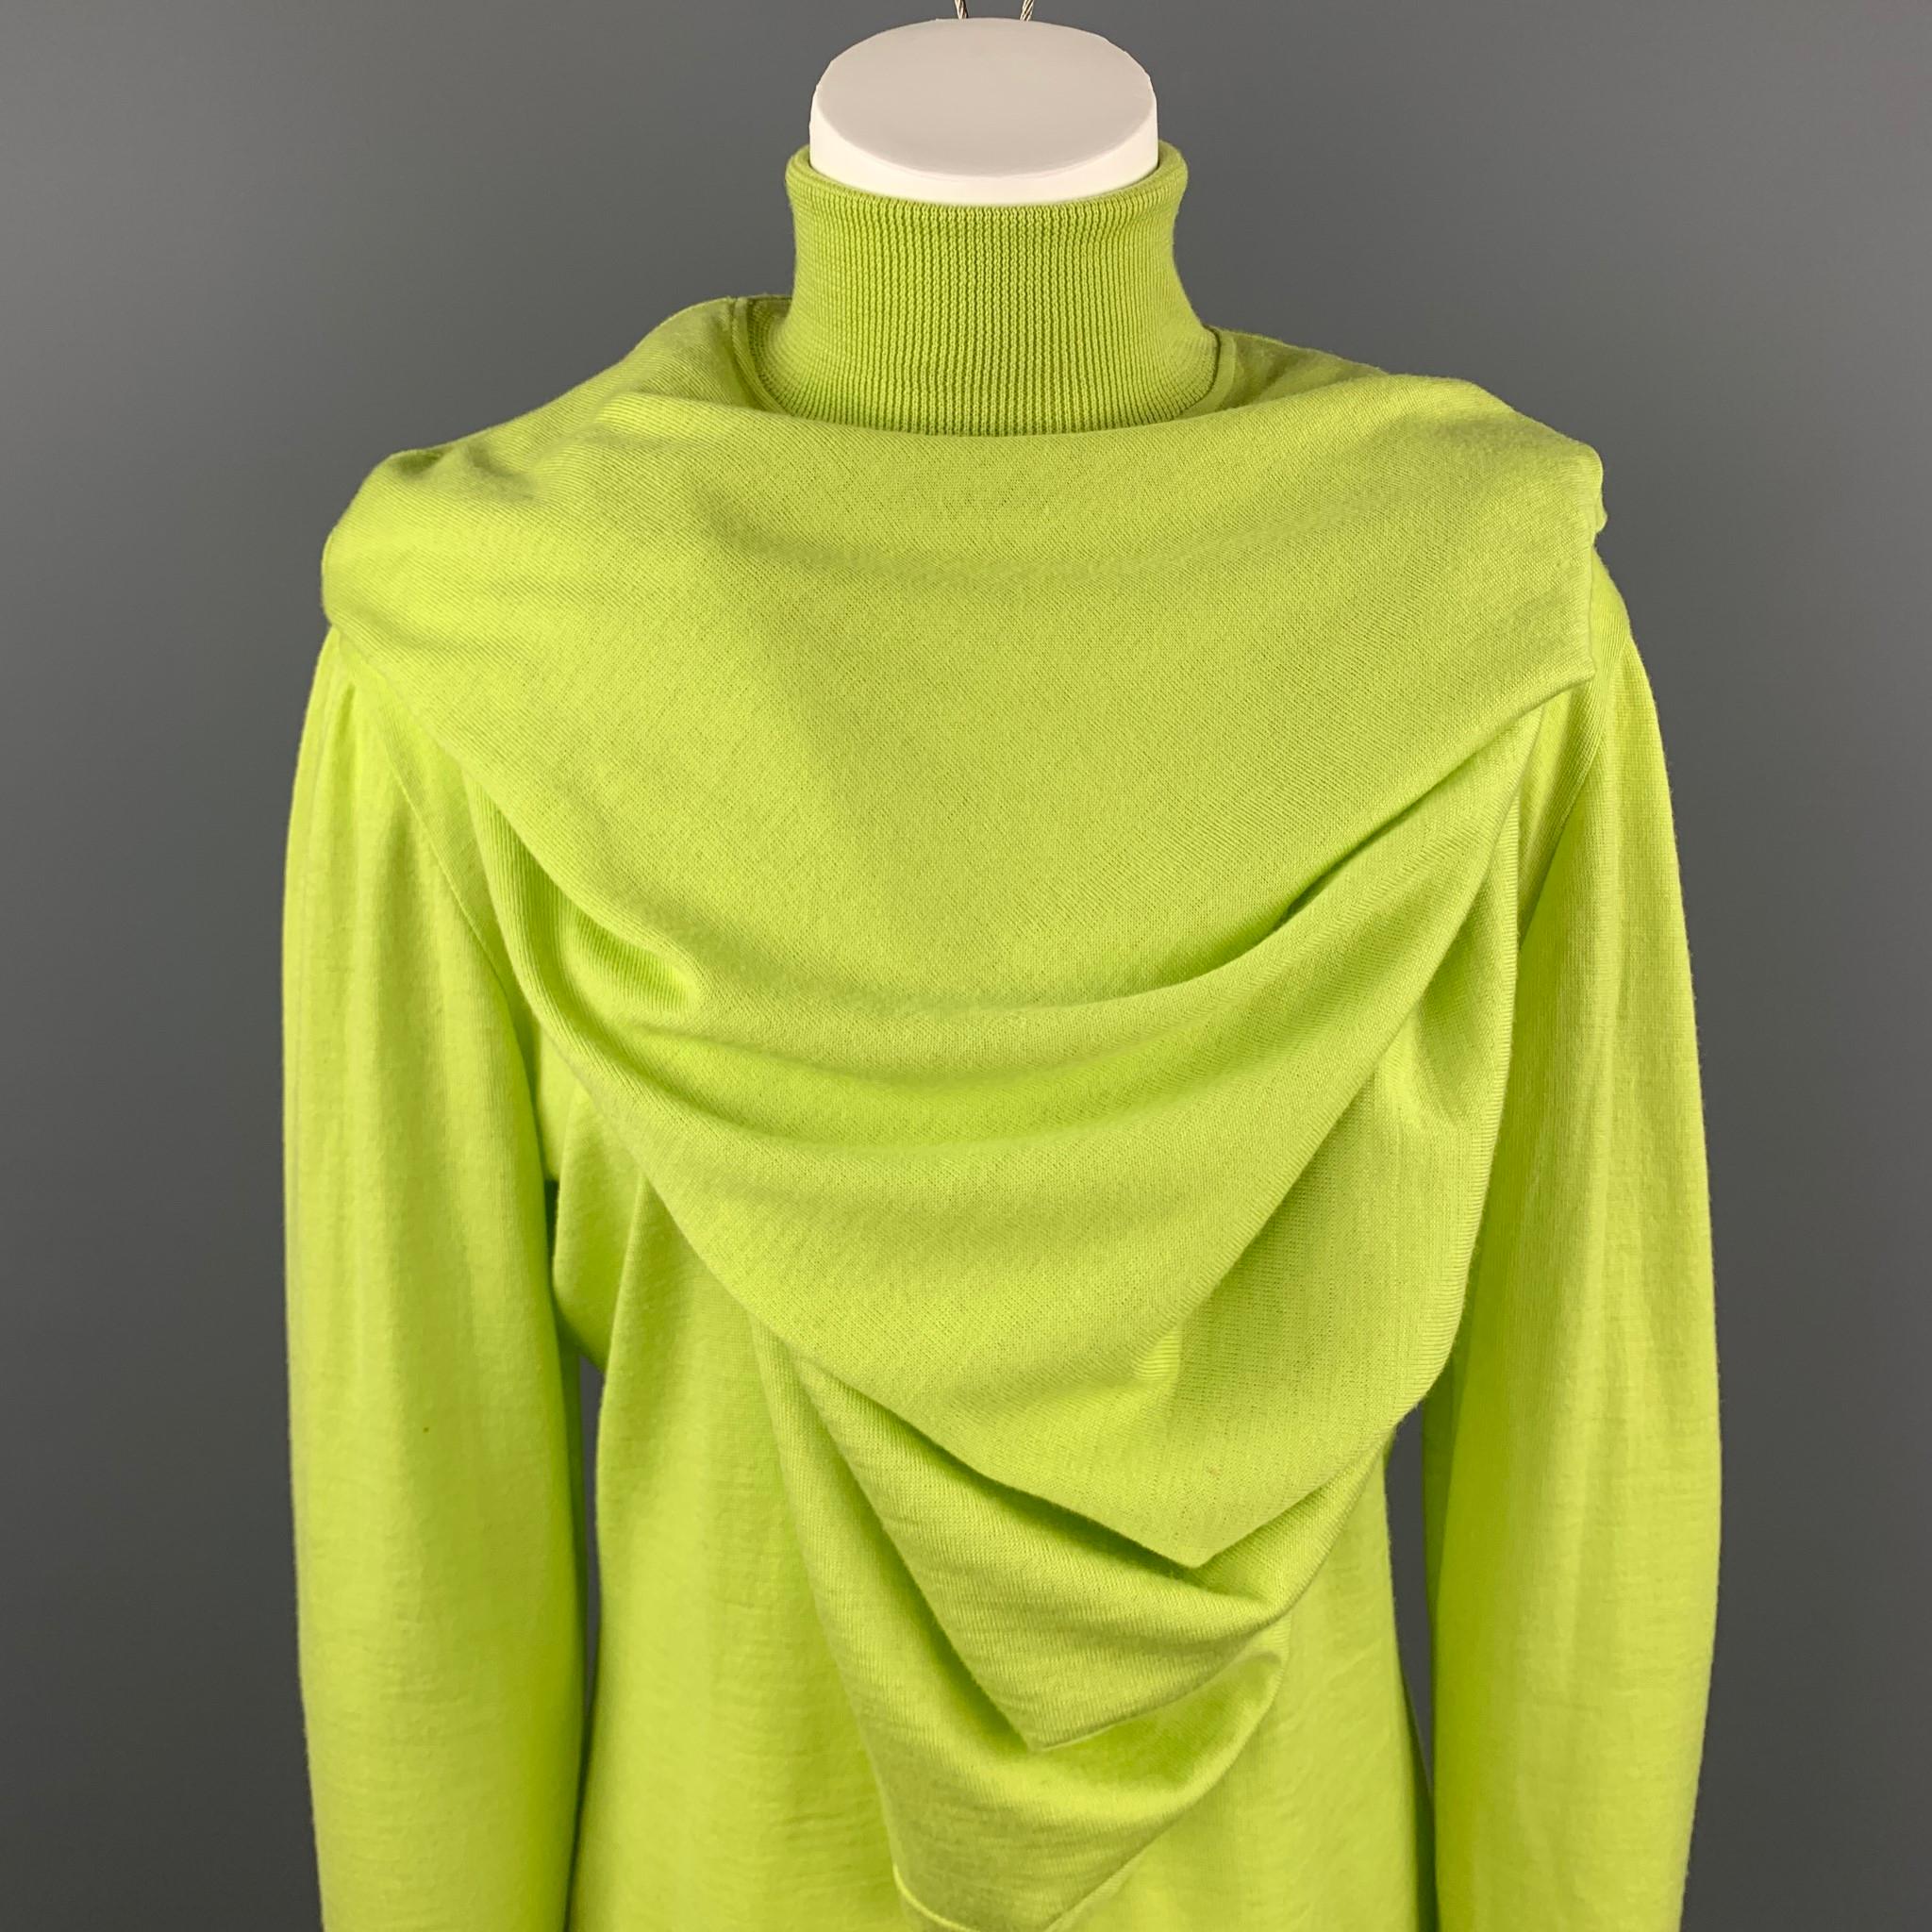 Vintage 1980's GIANNI VERSACE pullover comes in bold light lime green wool with a turtleneck and cape overlay. Made in Italy.

Excellent Pre-Owned Condition.
Marked: III

Measurements:

Shoulder: 18 in.
Bust: 40 in.
Sleeve: 23 in.
Length: 26 in.